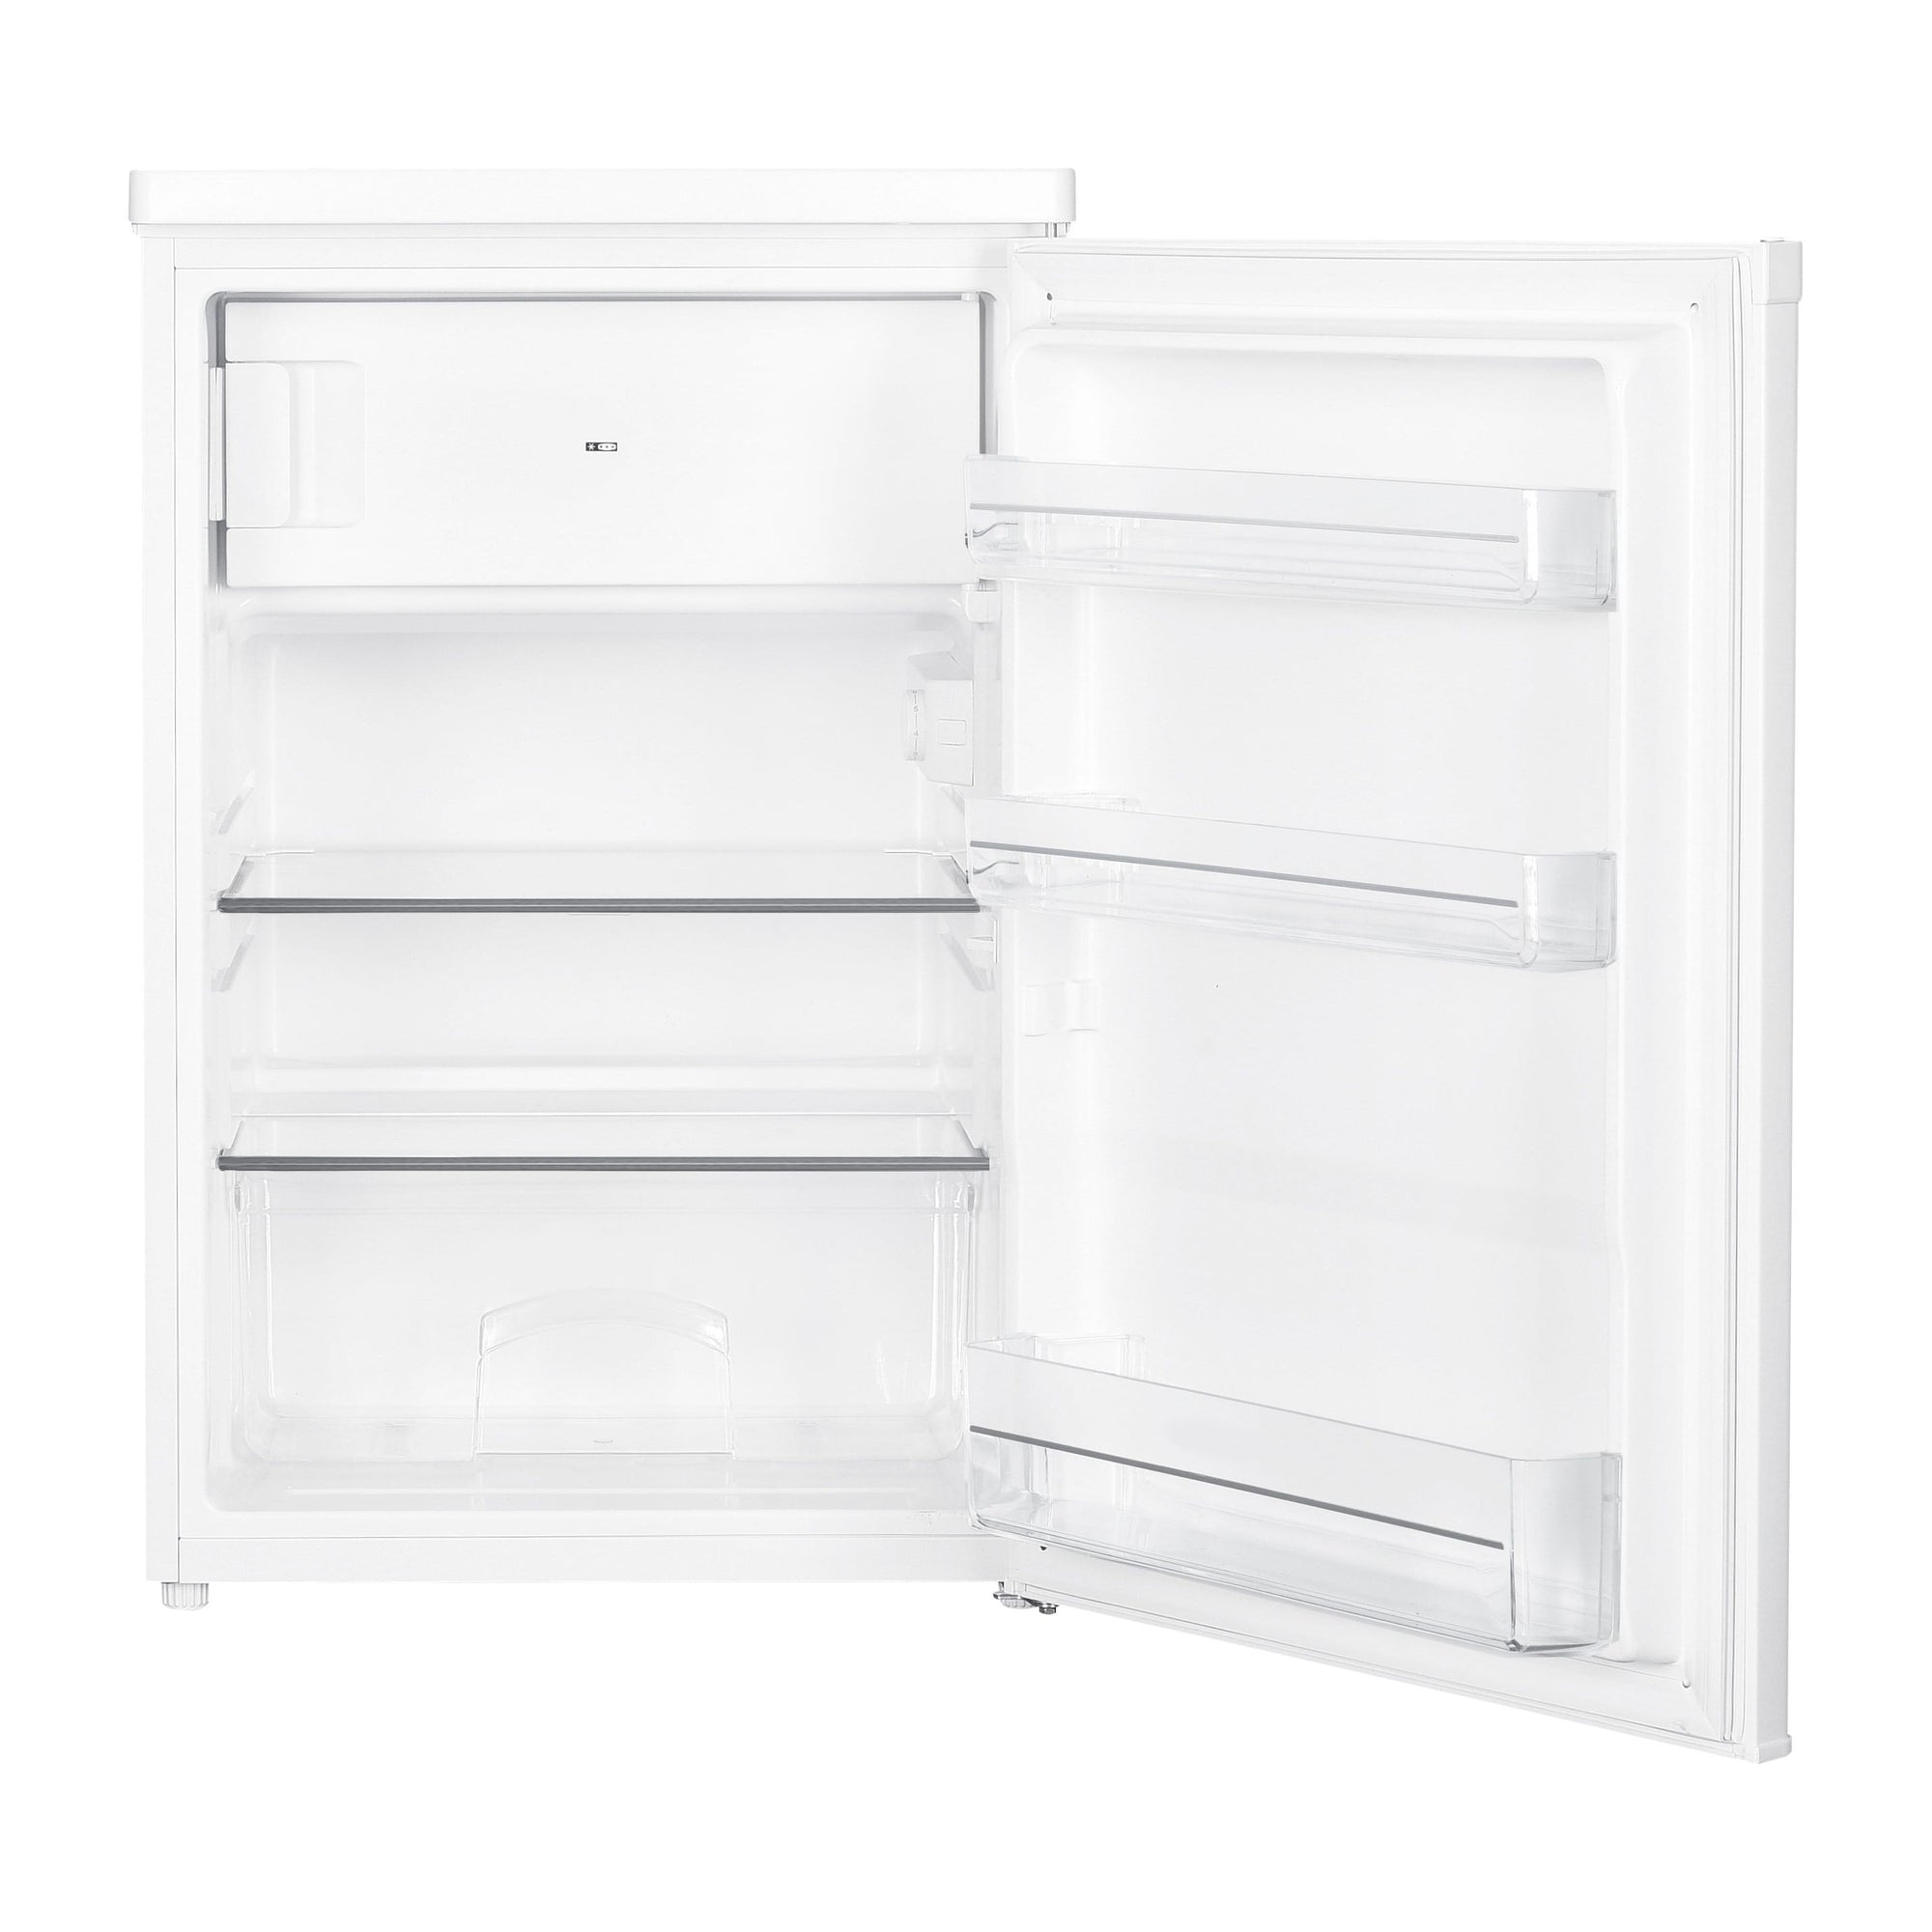 Belling 55CM 109L Undercounter Fridge with Ice Box - White | BR110WH from Belling - DID Electrical